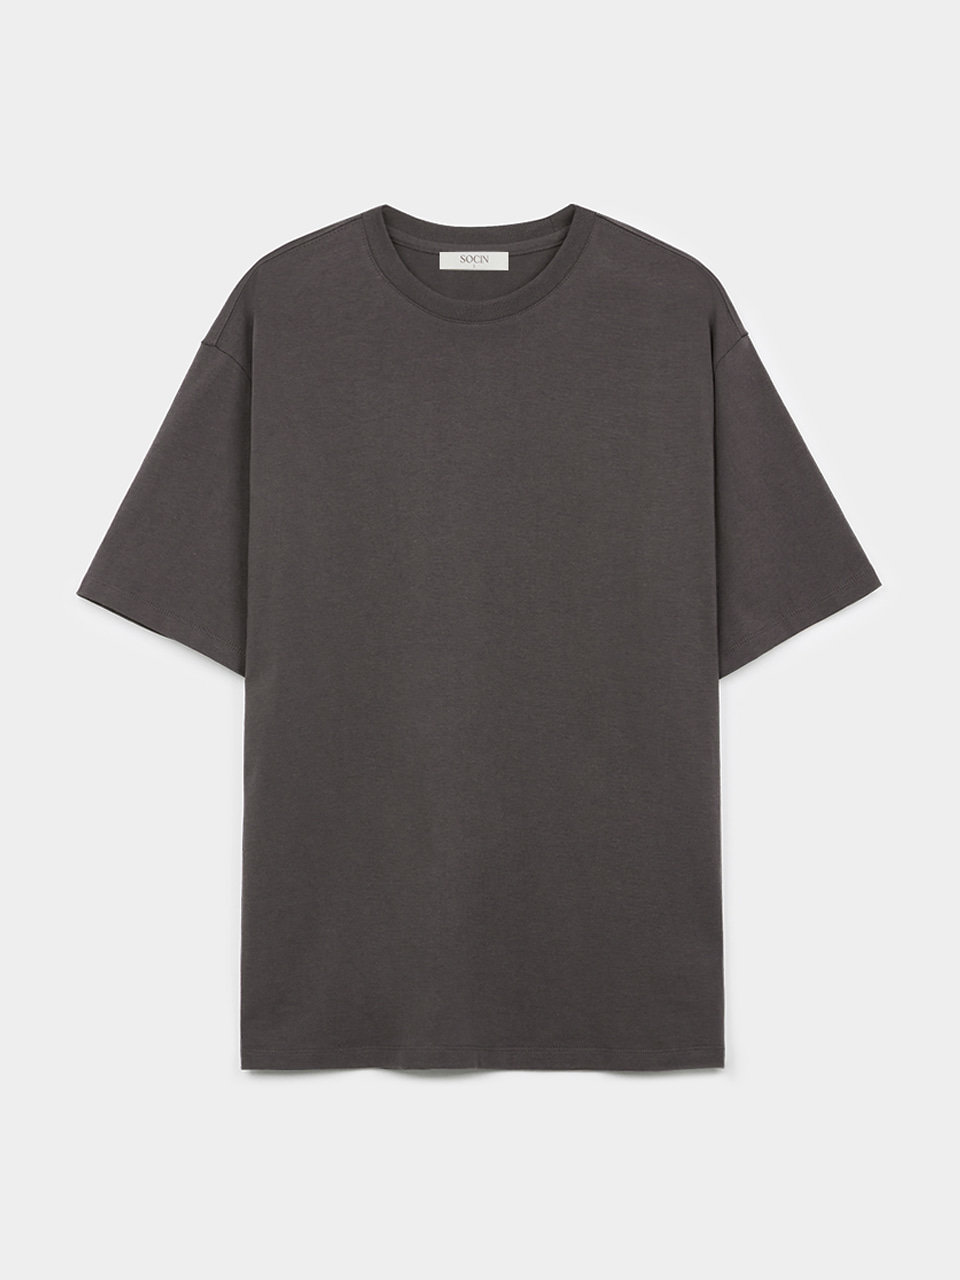 Silky Cotton Half T-shirts (Charcoal Brown)